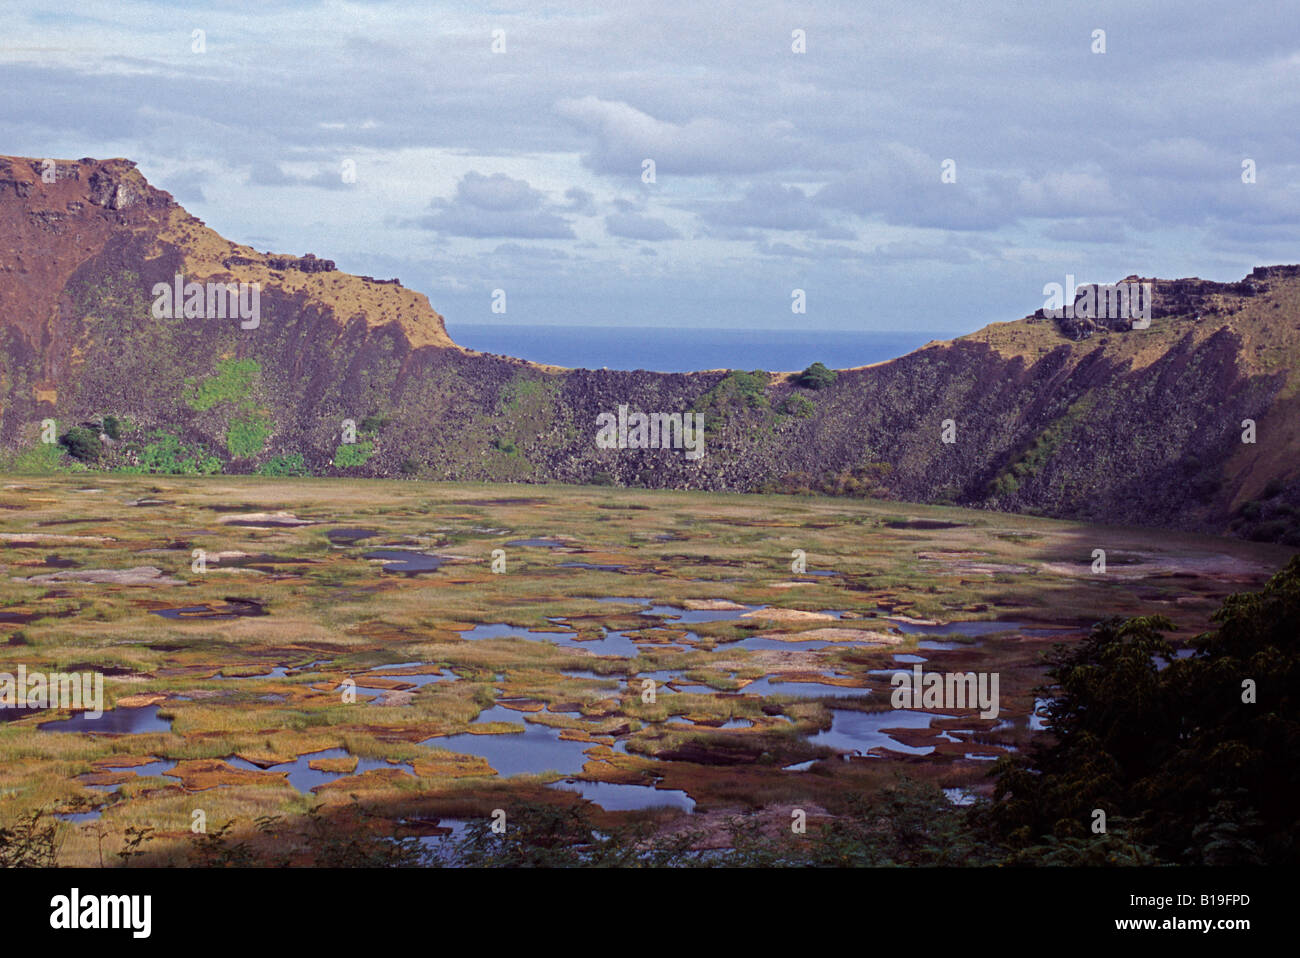 Chile, Easter Island. The rim of the crater of Rano Kau volcano at the south western tip of Easter Island. Stock Photo